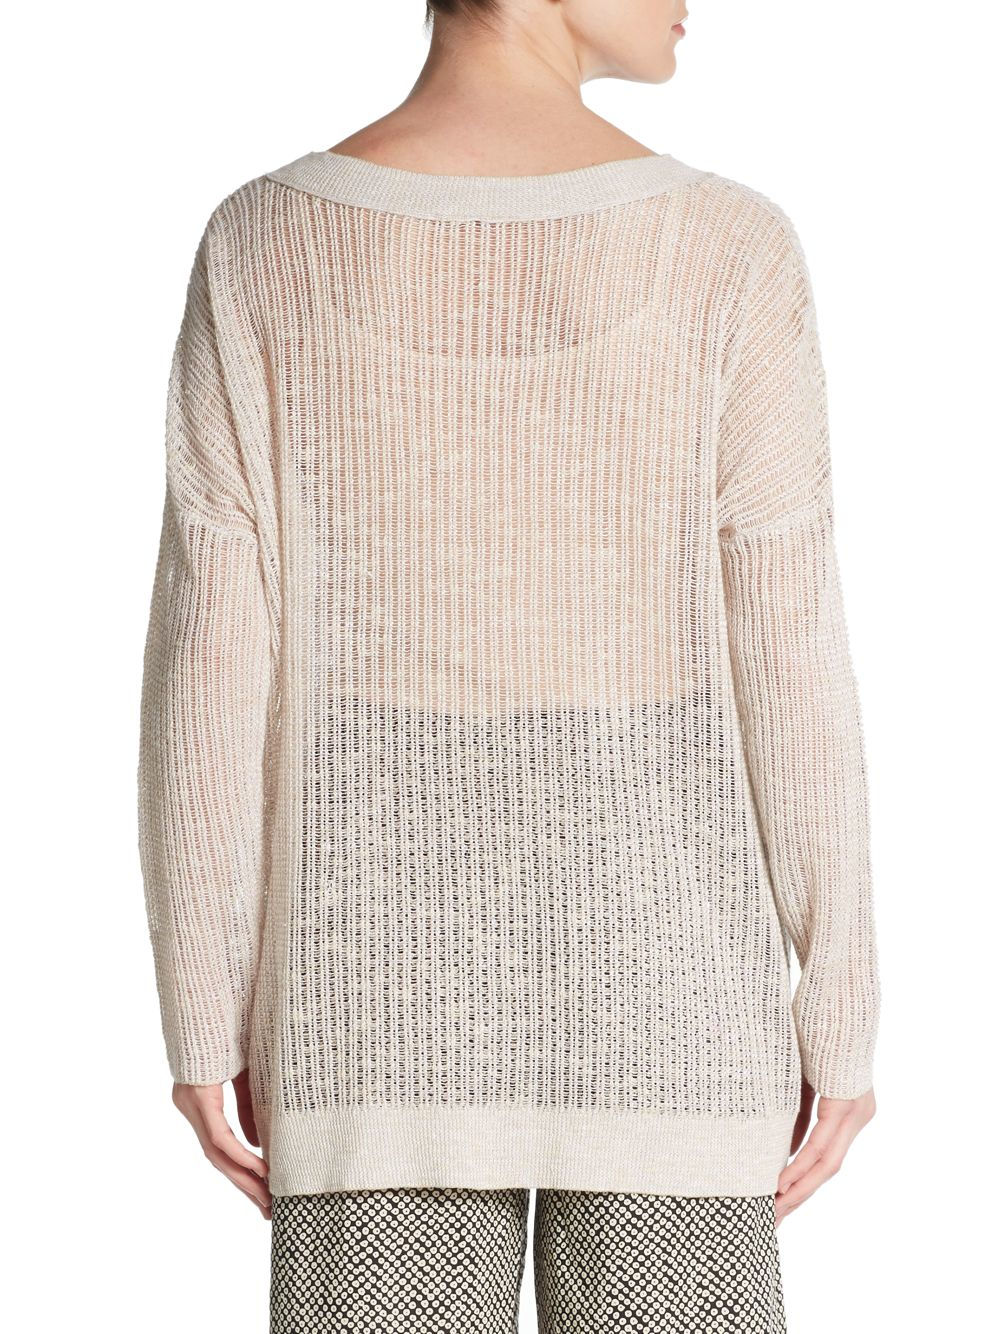 Eileen Fisher Linen & Cotton Open-knit Sweater in Natural - Lyst